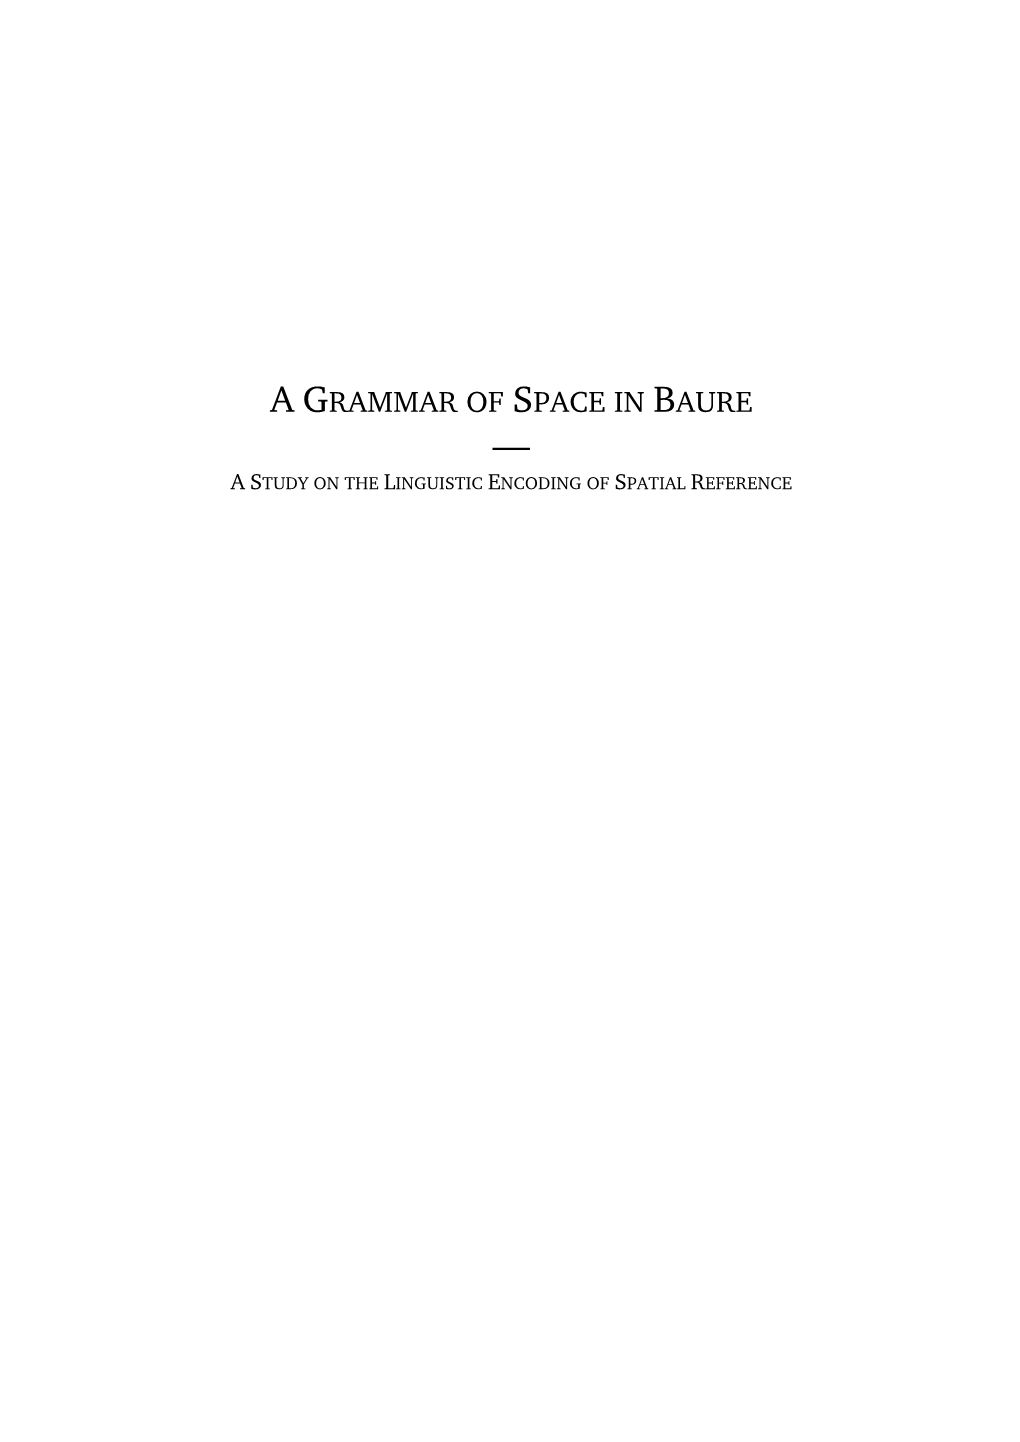 A Grammar of Space in Baure — a Study on the Linguistic Encoding of Spatial Reference